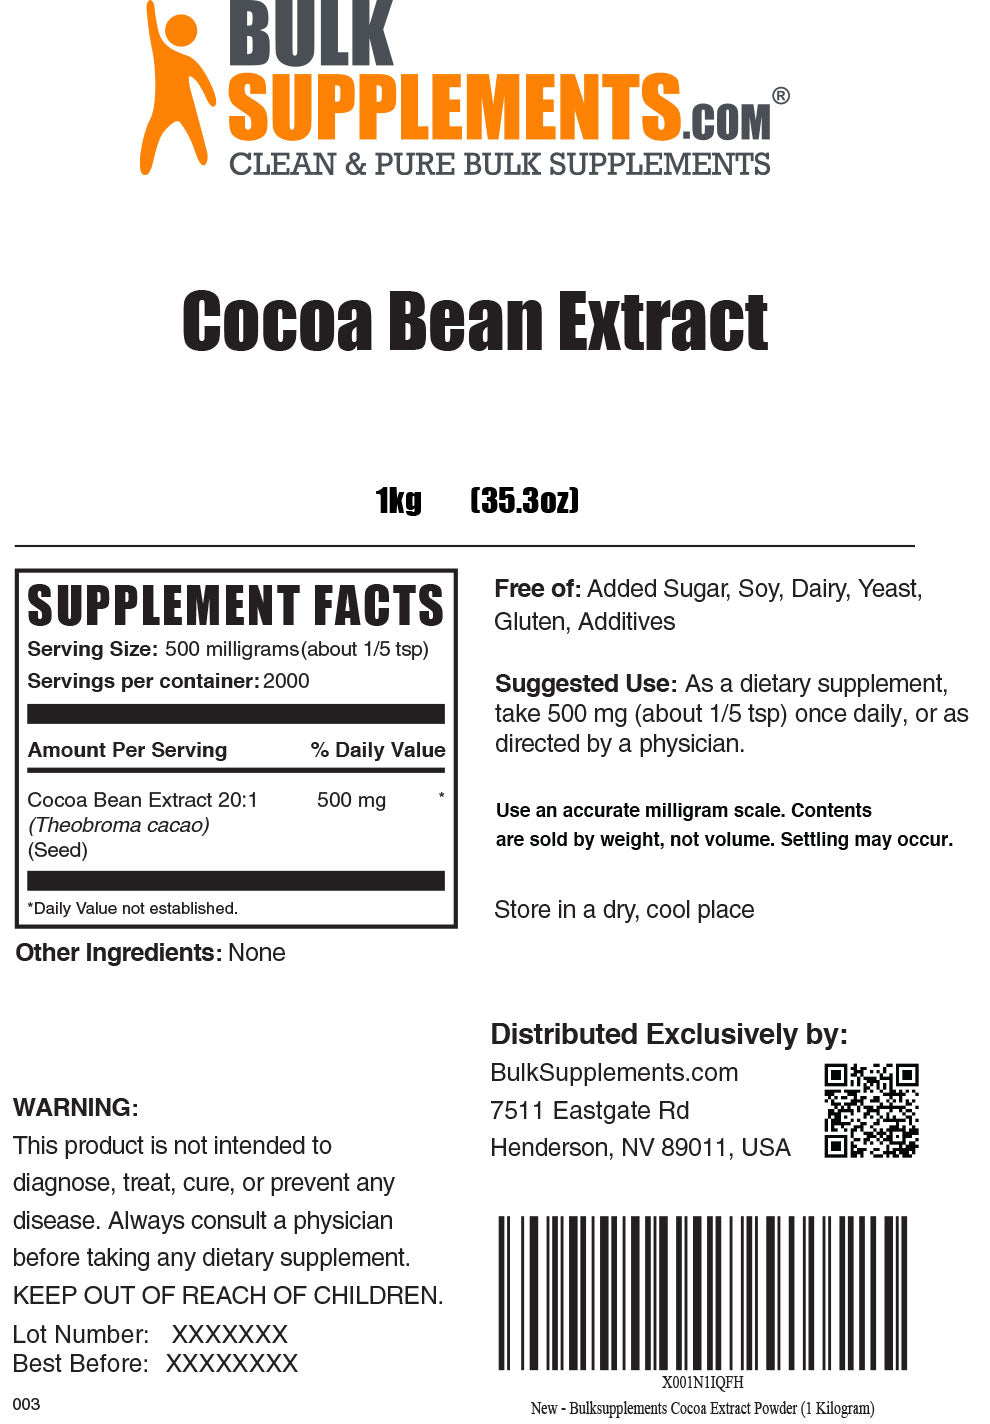 1kg Cocoa Bean supplement facts label